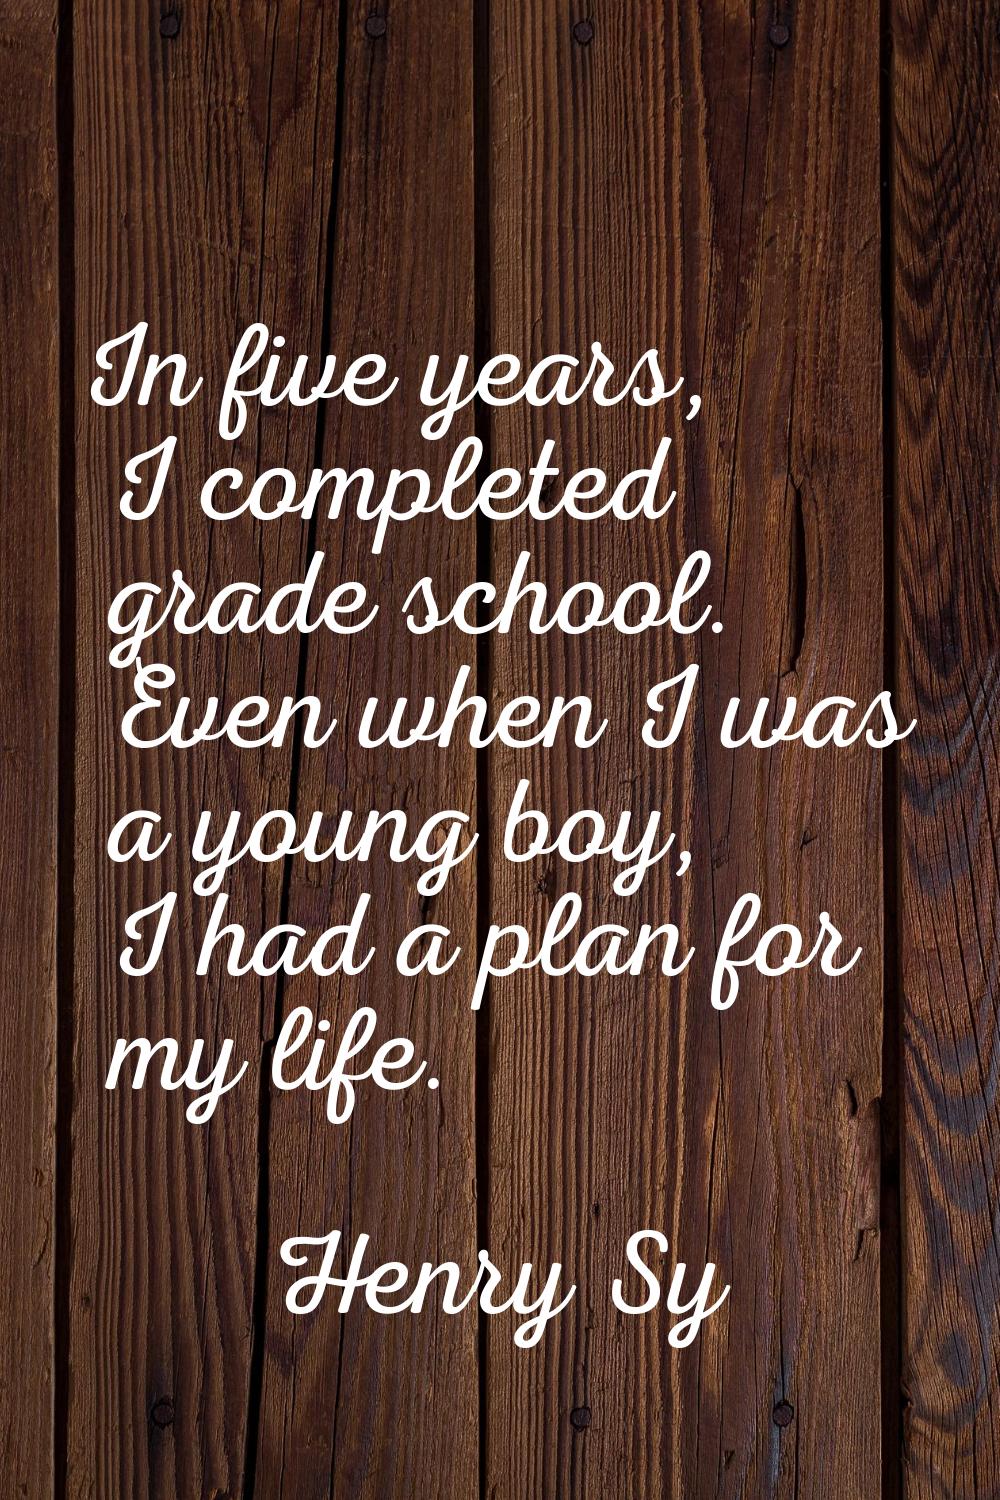 In five years, I completed grade school. Even when I was a young boy, I had a plan for my life.